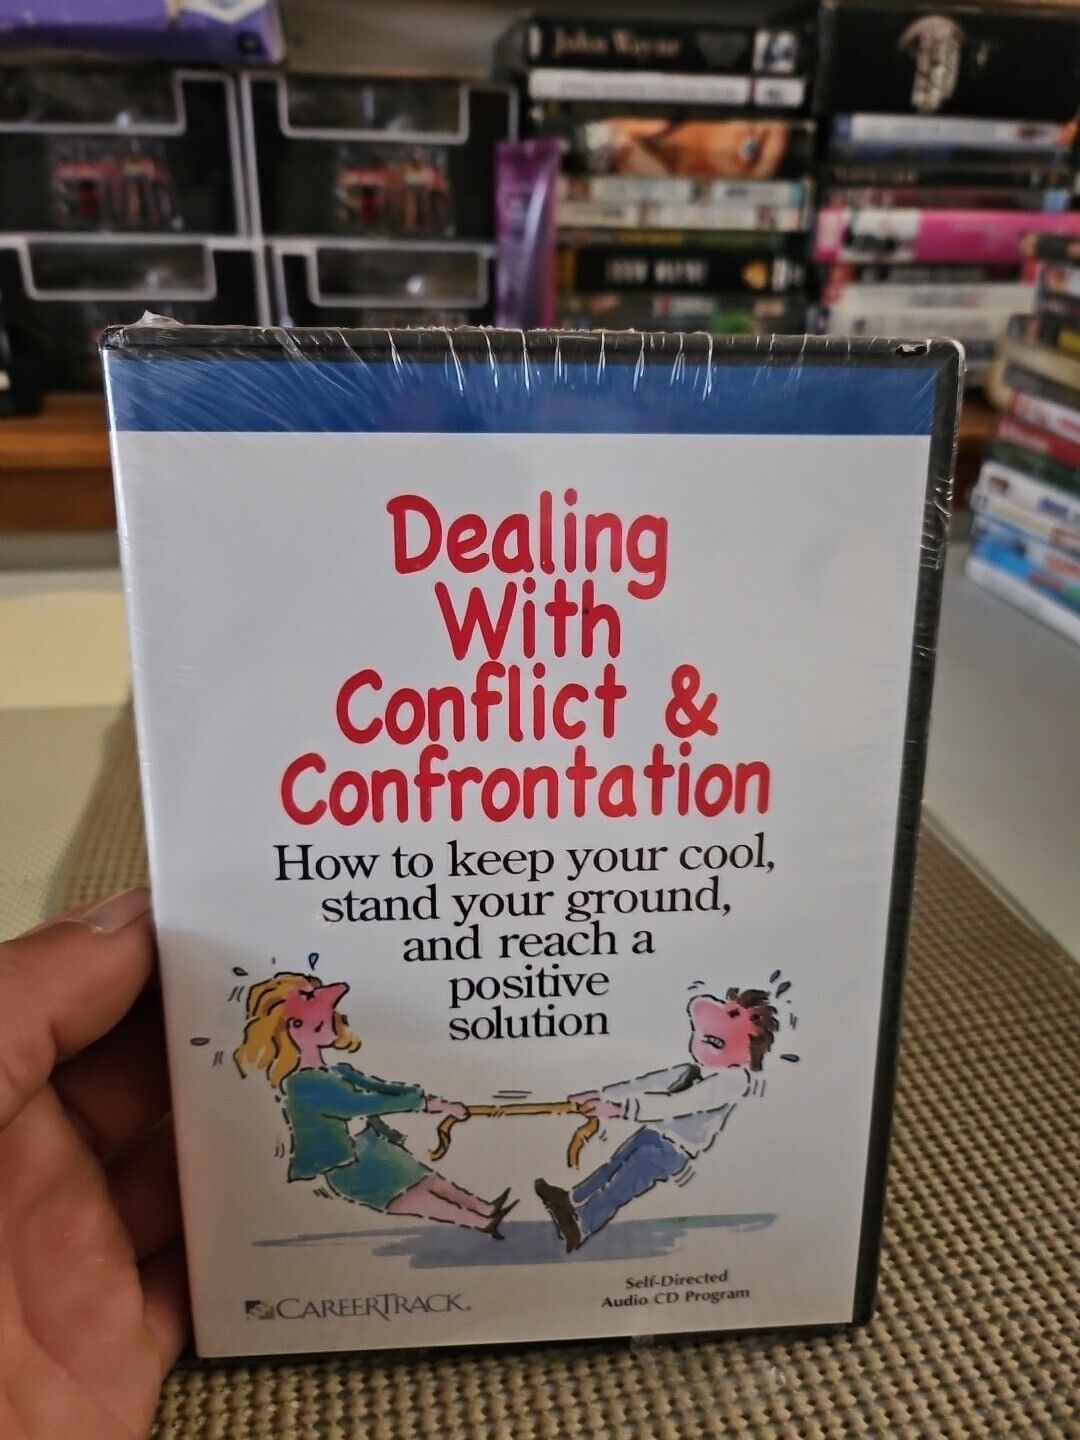 Dealing With Conflict & Confrontation Careertrack 4 Disc Set Audio CD Tlr8#50